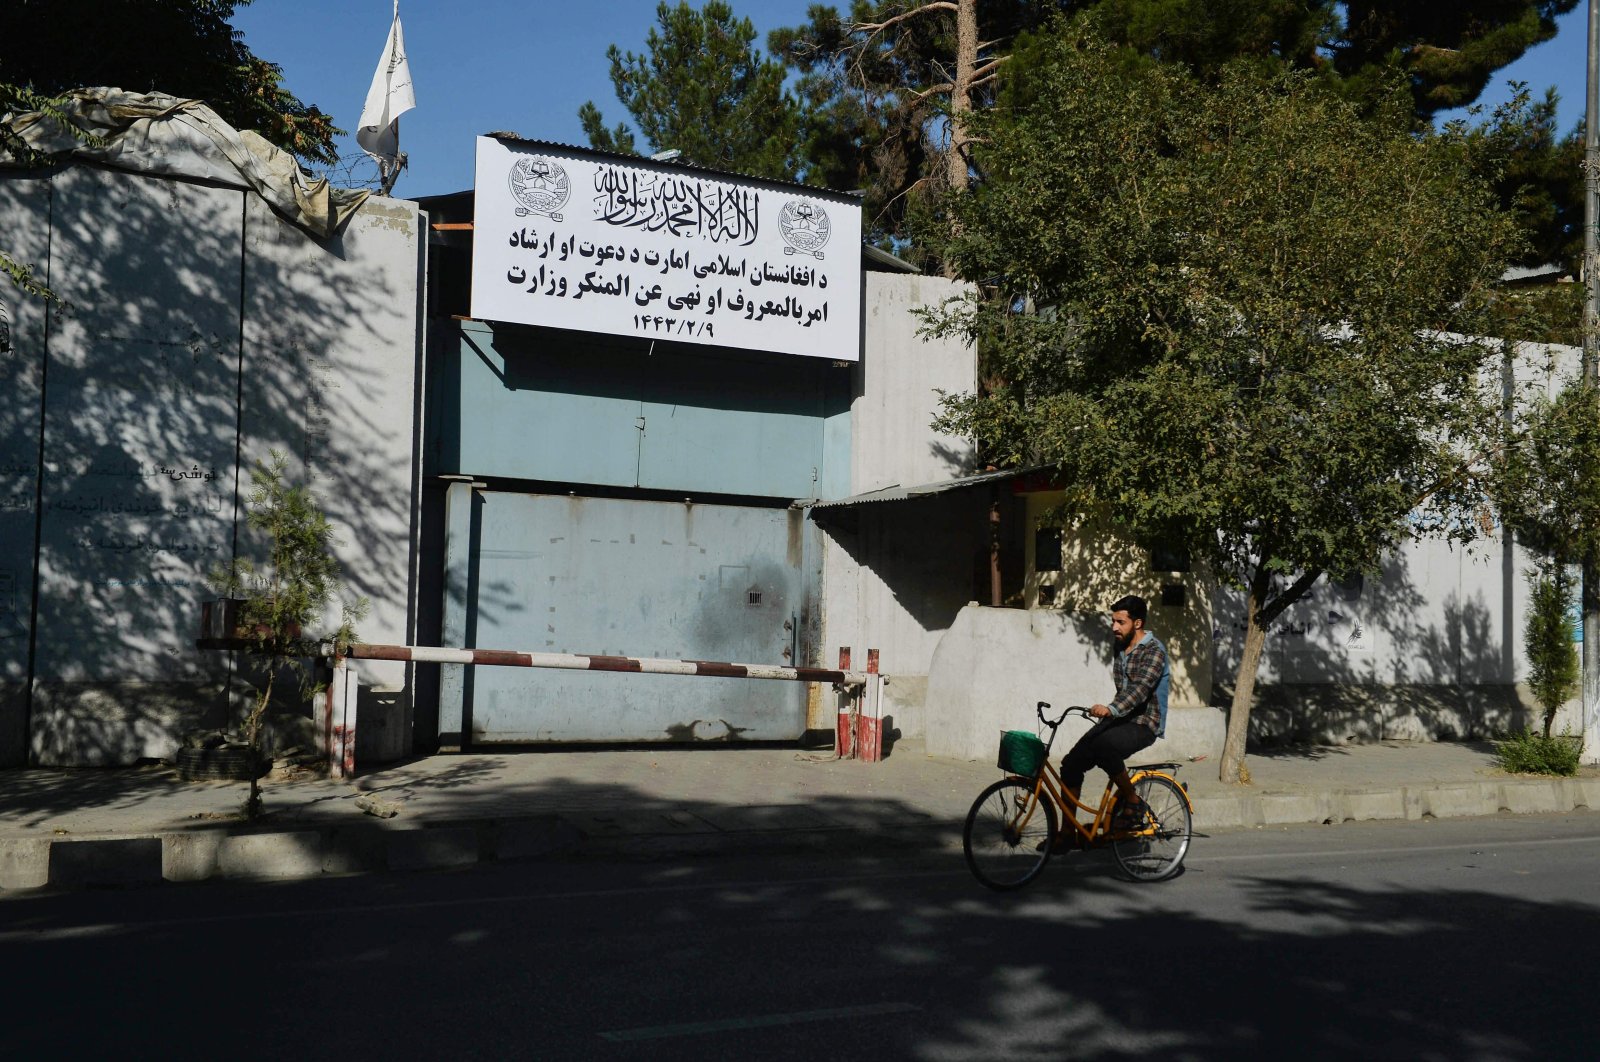 A man rides his bike past an entrance gate of the Ministry for the Promotion of Virtue and Prevention of Vice in Kabul, Afghanistan, Sept. 17, 2021. (Photo by Hoshang Hashimi via AFP)